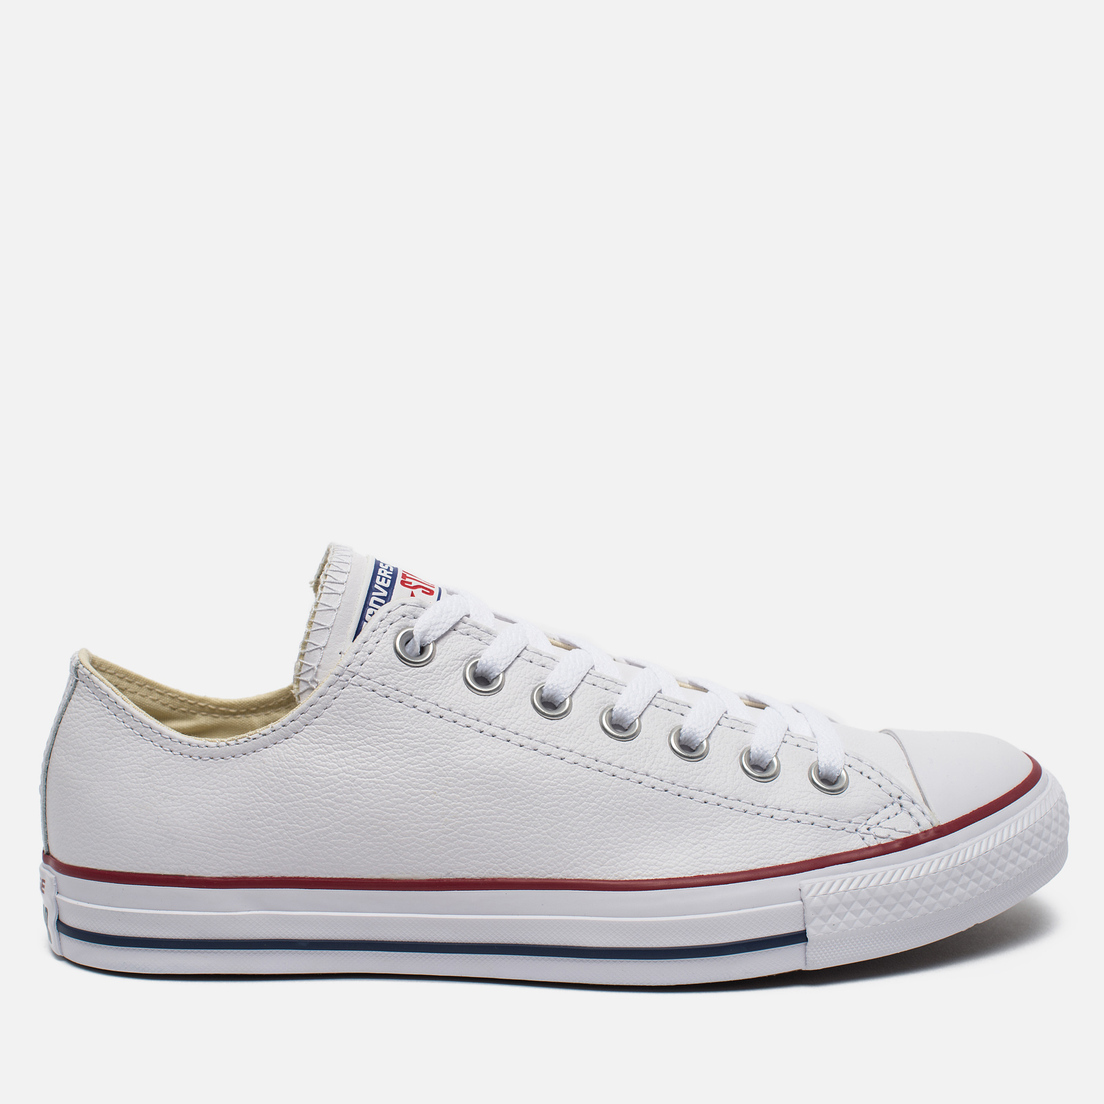 all star white low